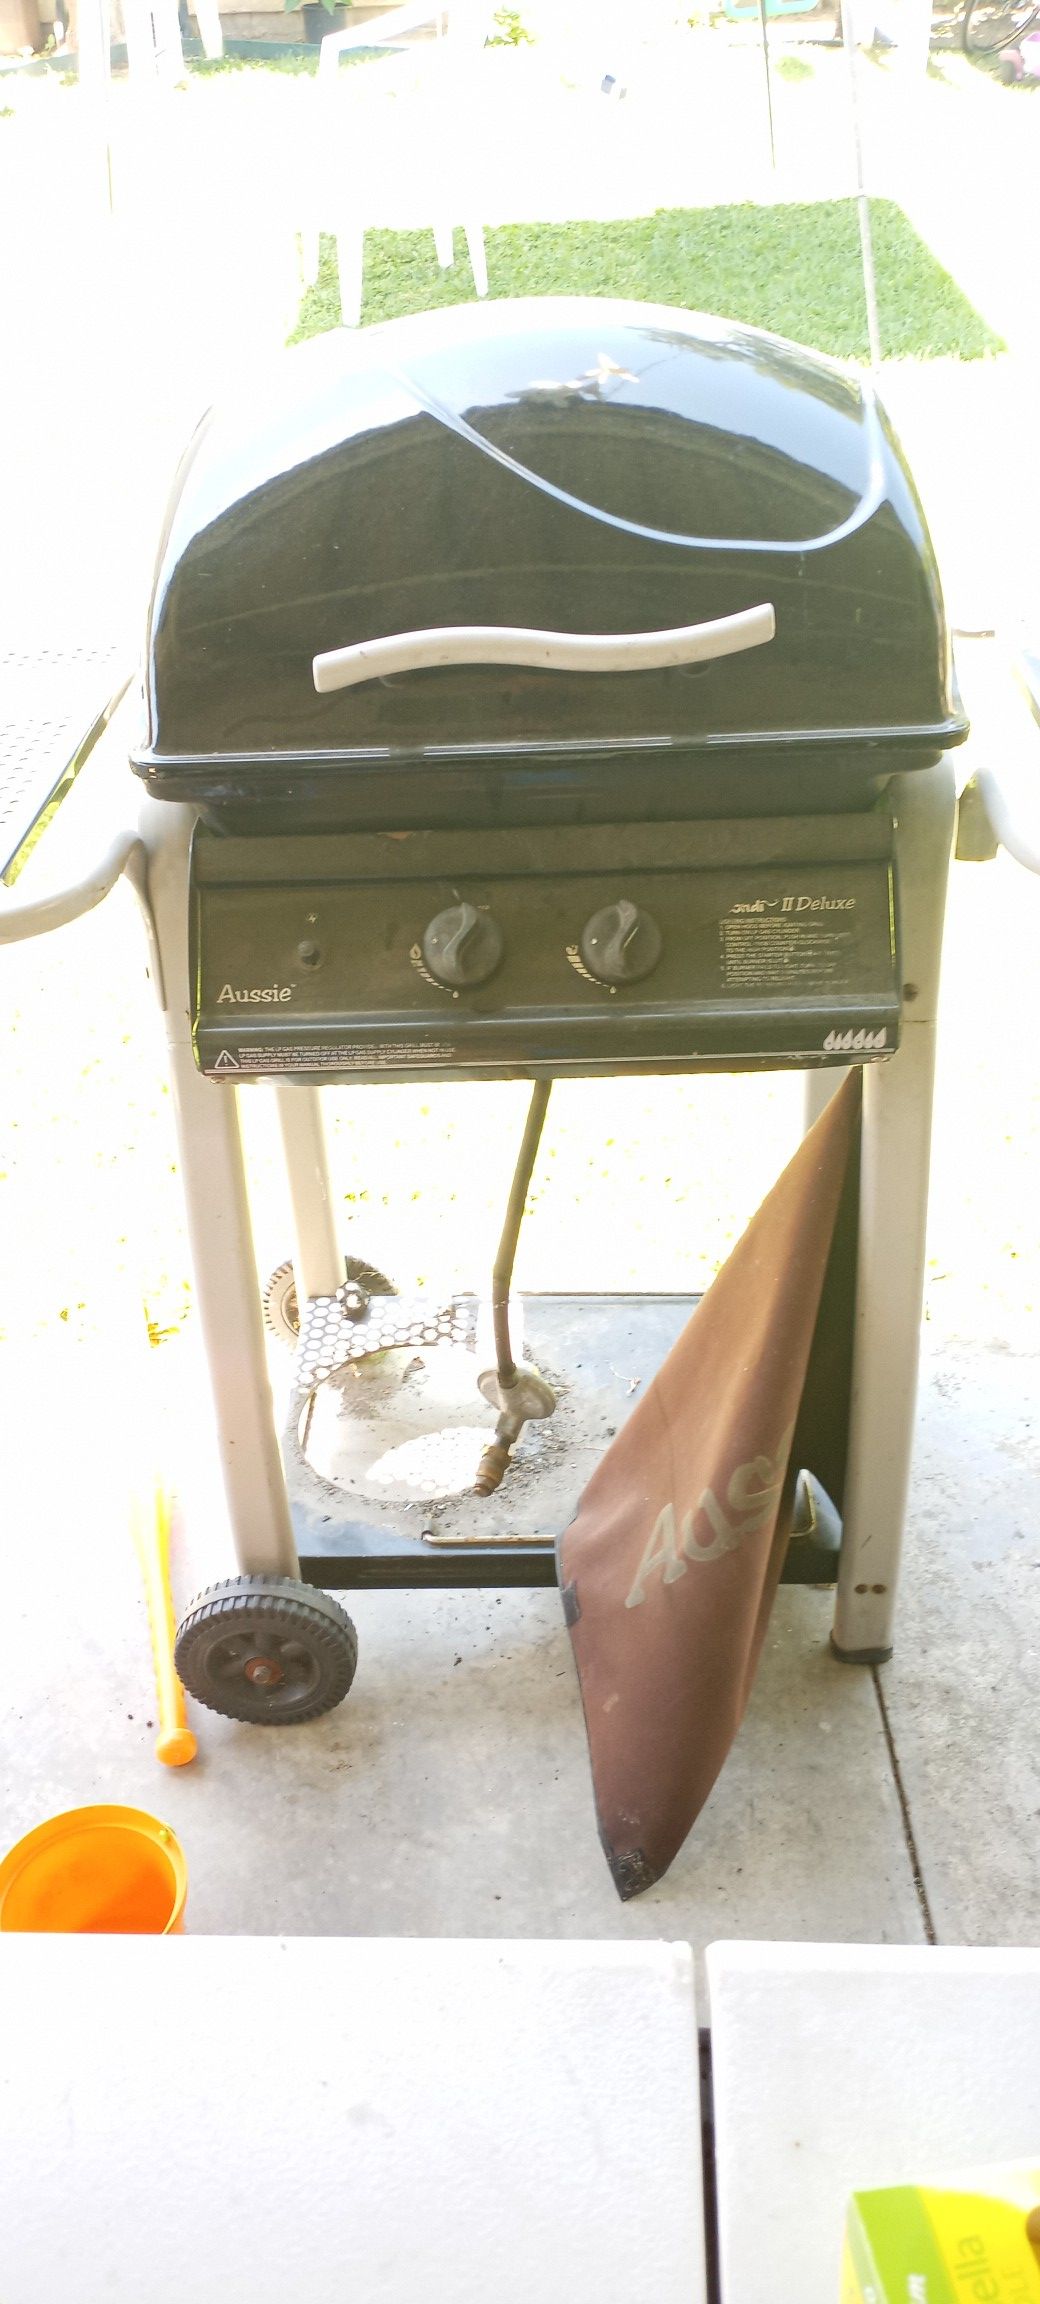 Used BBQ grill